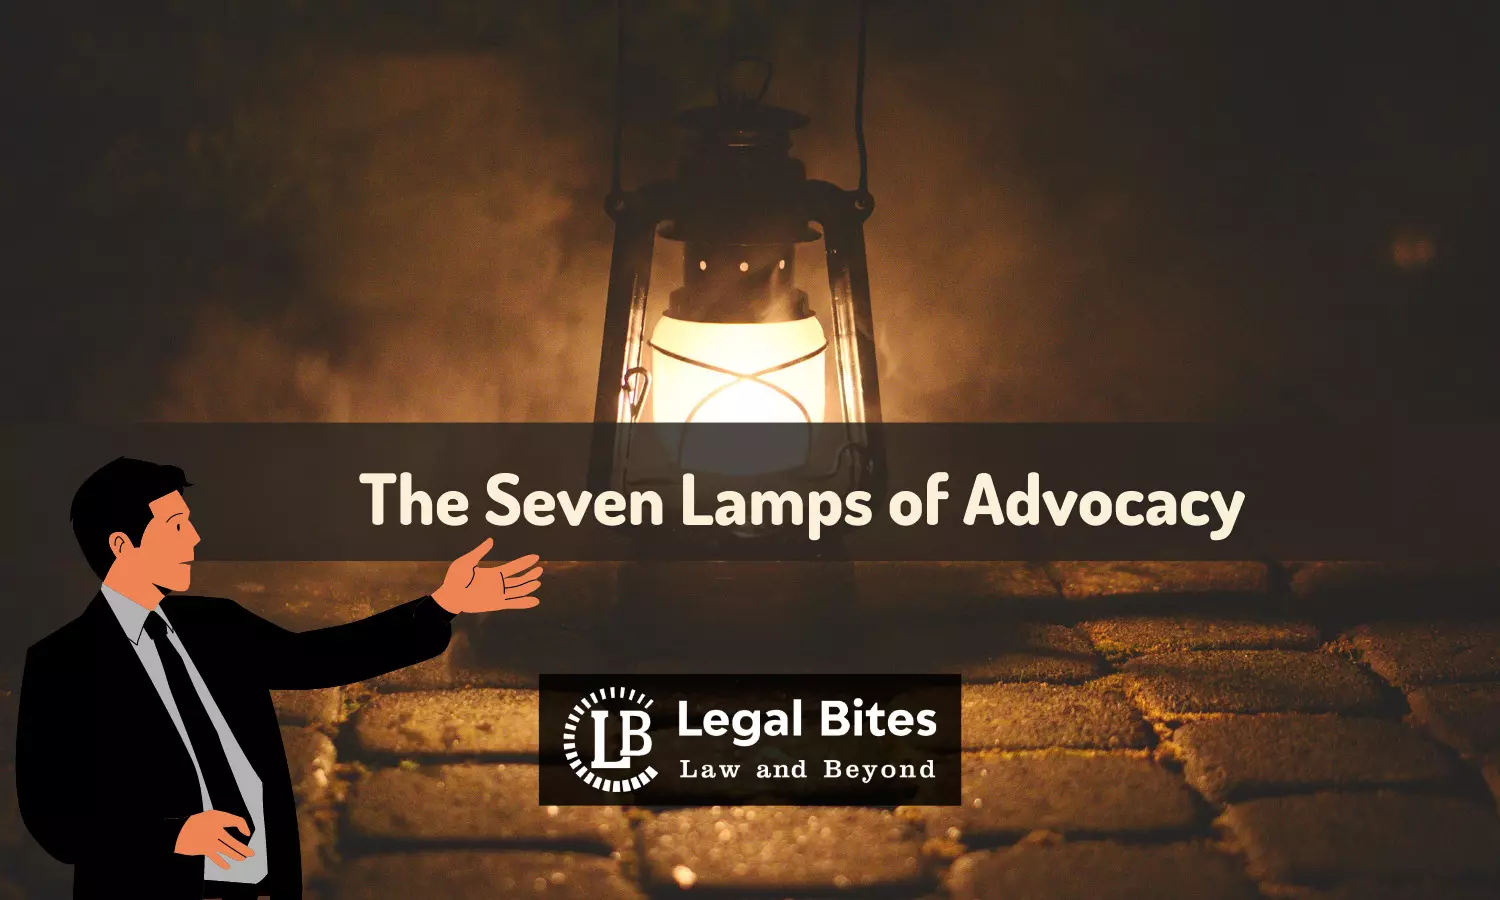 Critical Professional Ethics: The Seven Lamps of Advocacy